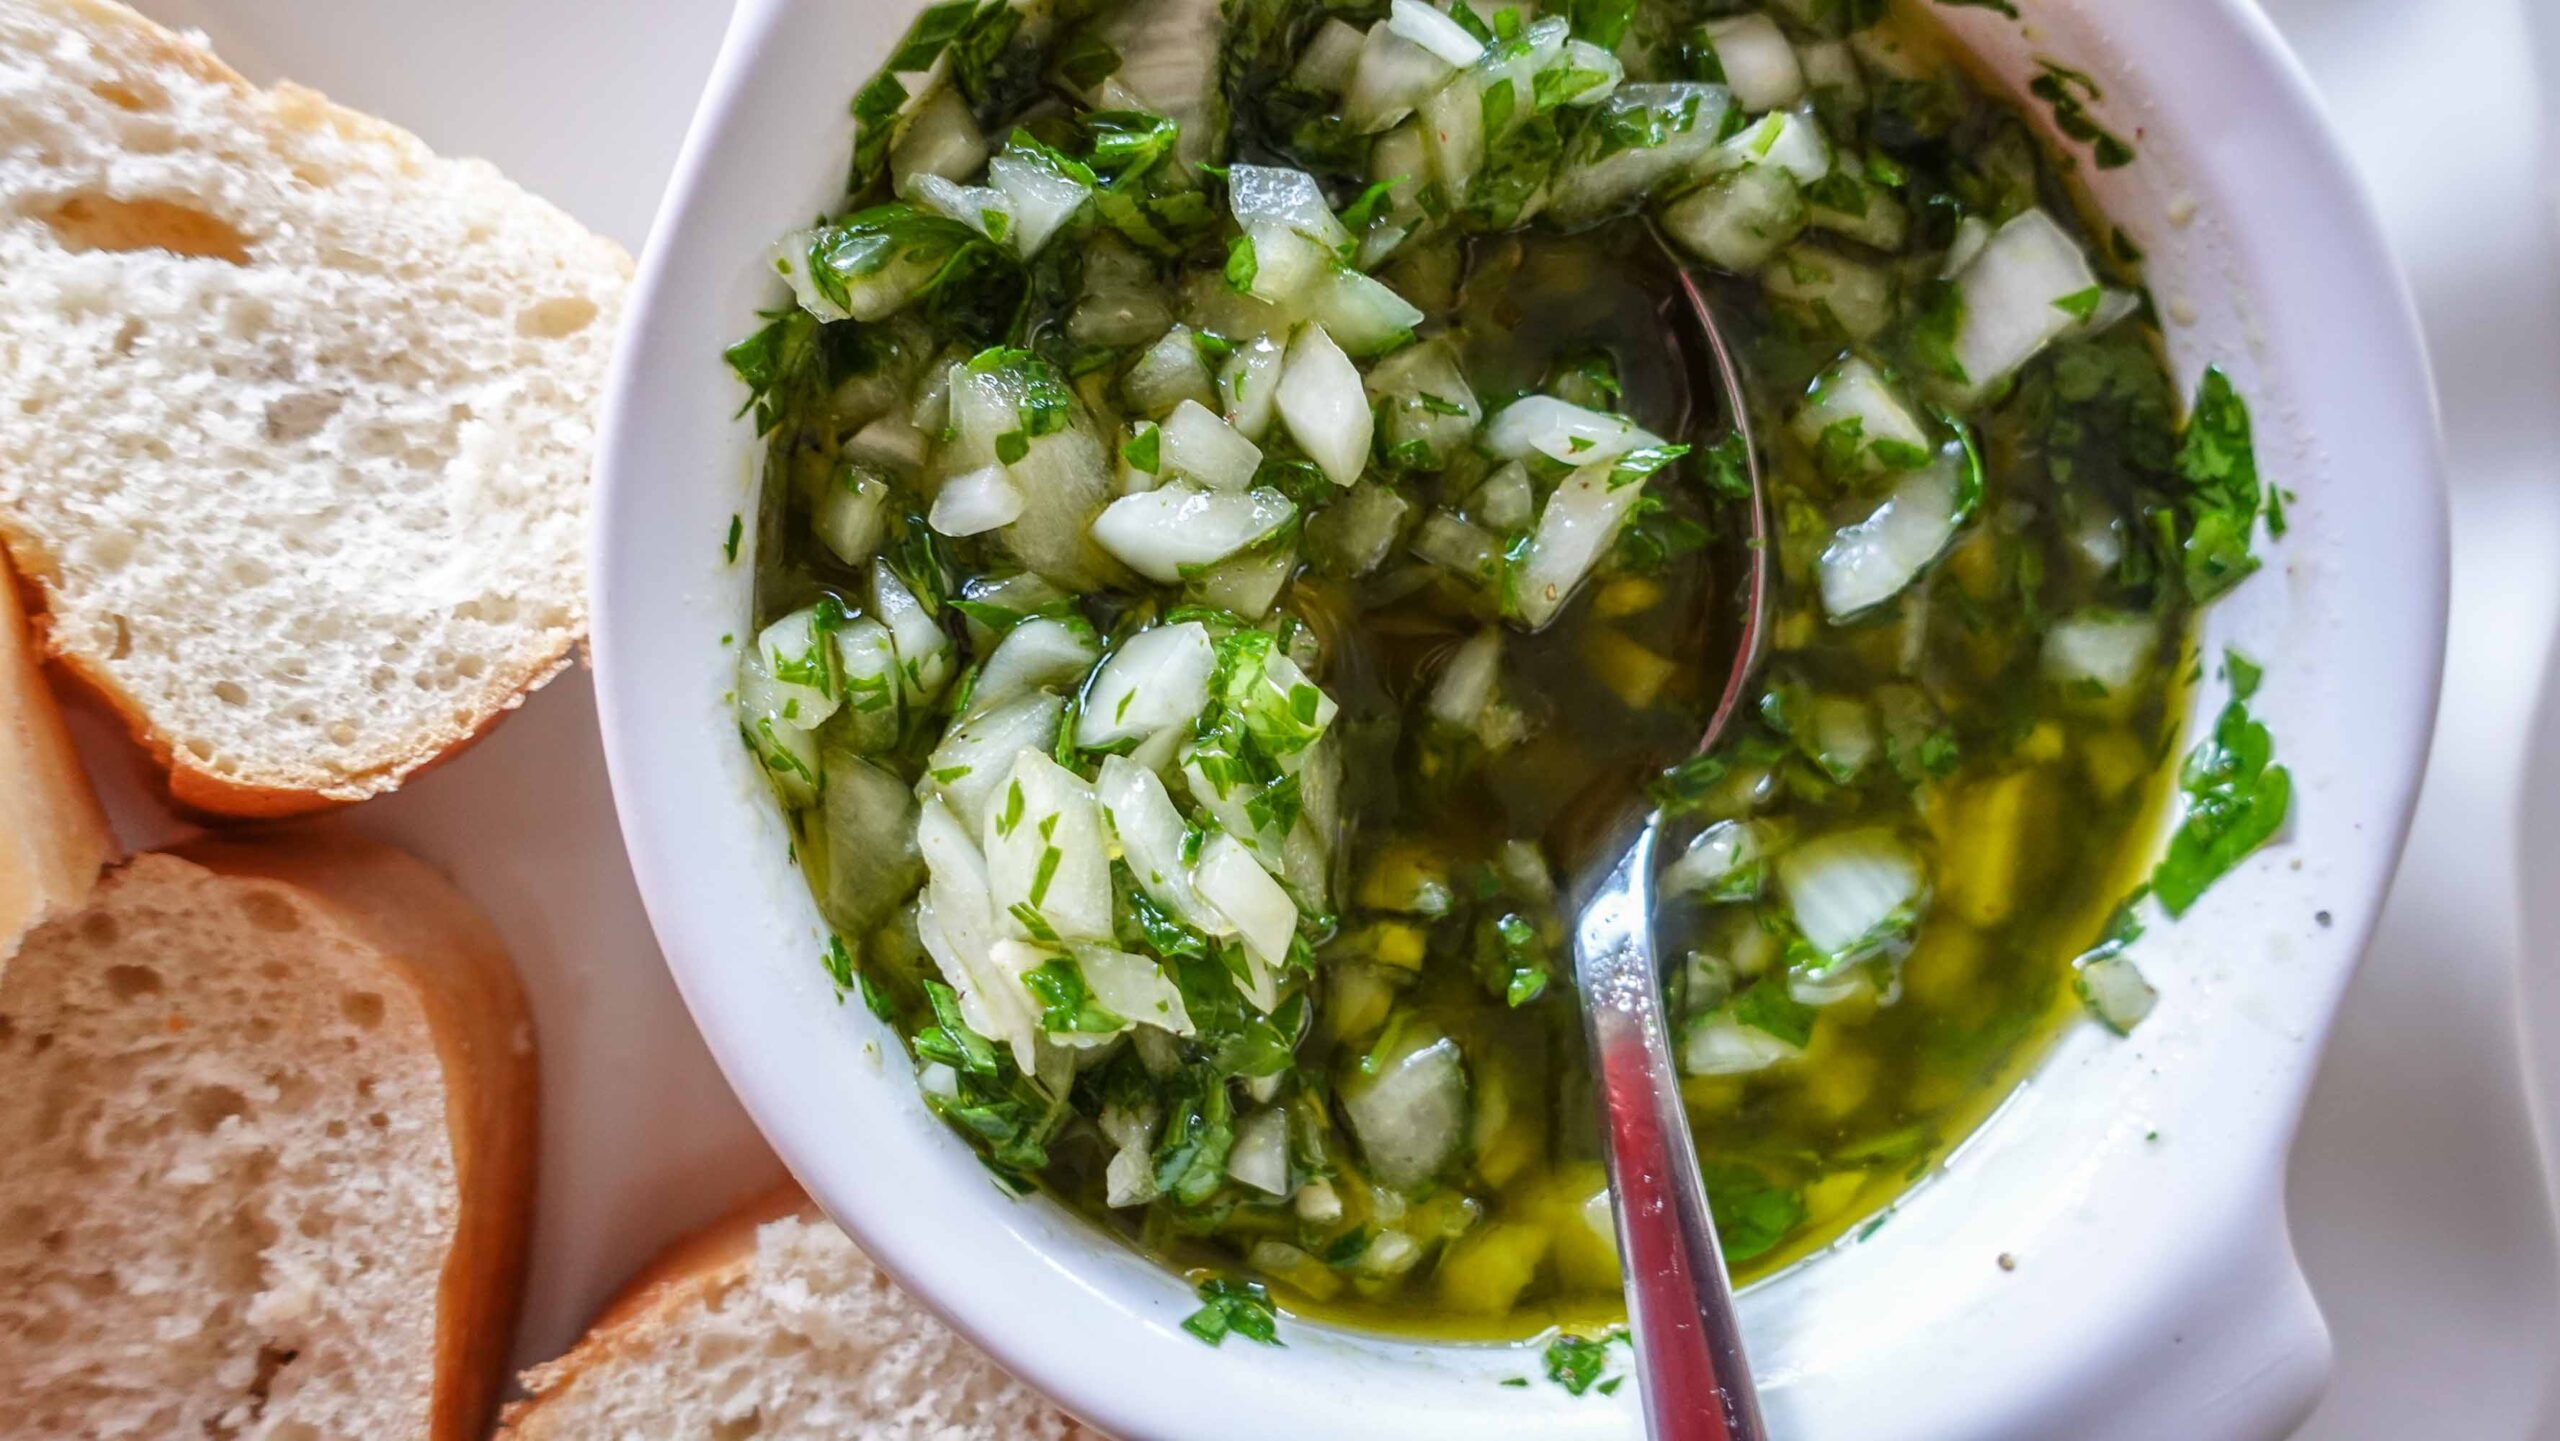 Portuguese salsa verde in a bowl with bread pieces.